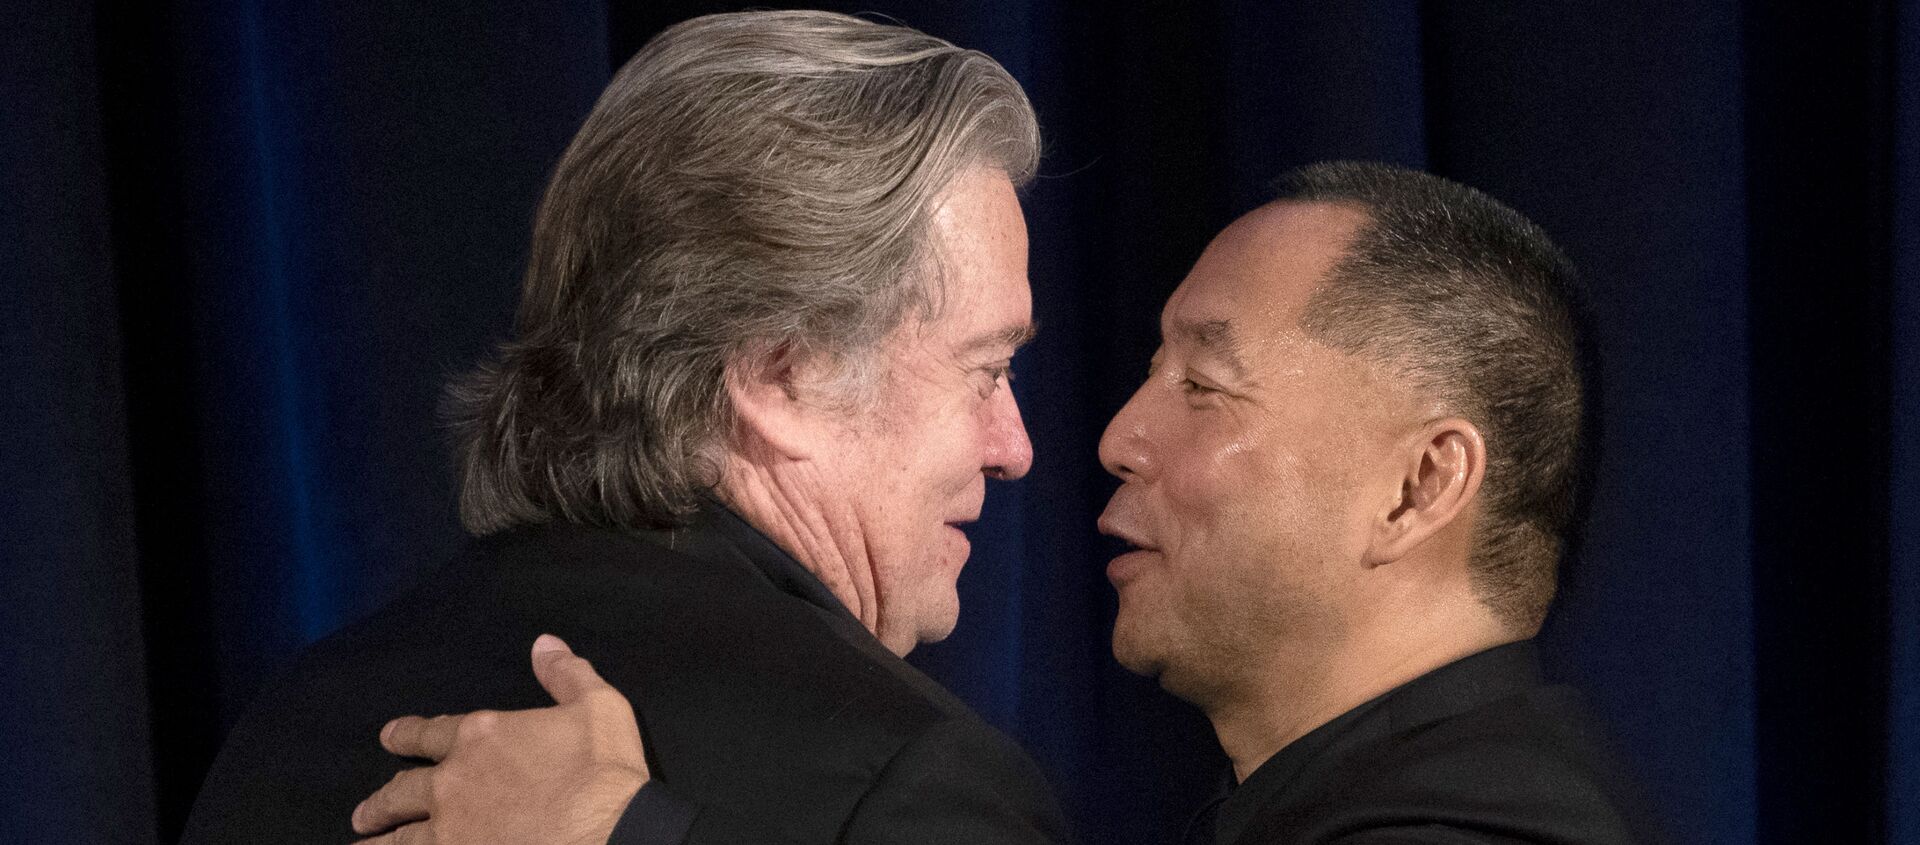 Former White House Chief Strategist Steve Bannon (L) greets fugitive Chinese billionaire Guo Wengui before introducing him at a news conference on November 20, 2018 in New York, on the death of of tycoon Wang Jian in France on July 3, 2018. - Sputnik International, 1920, 09.07.2020